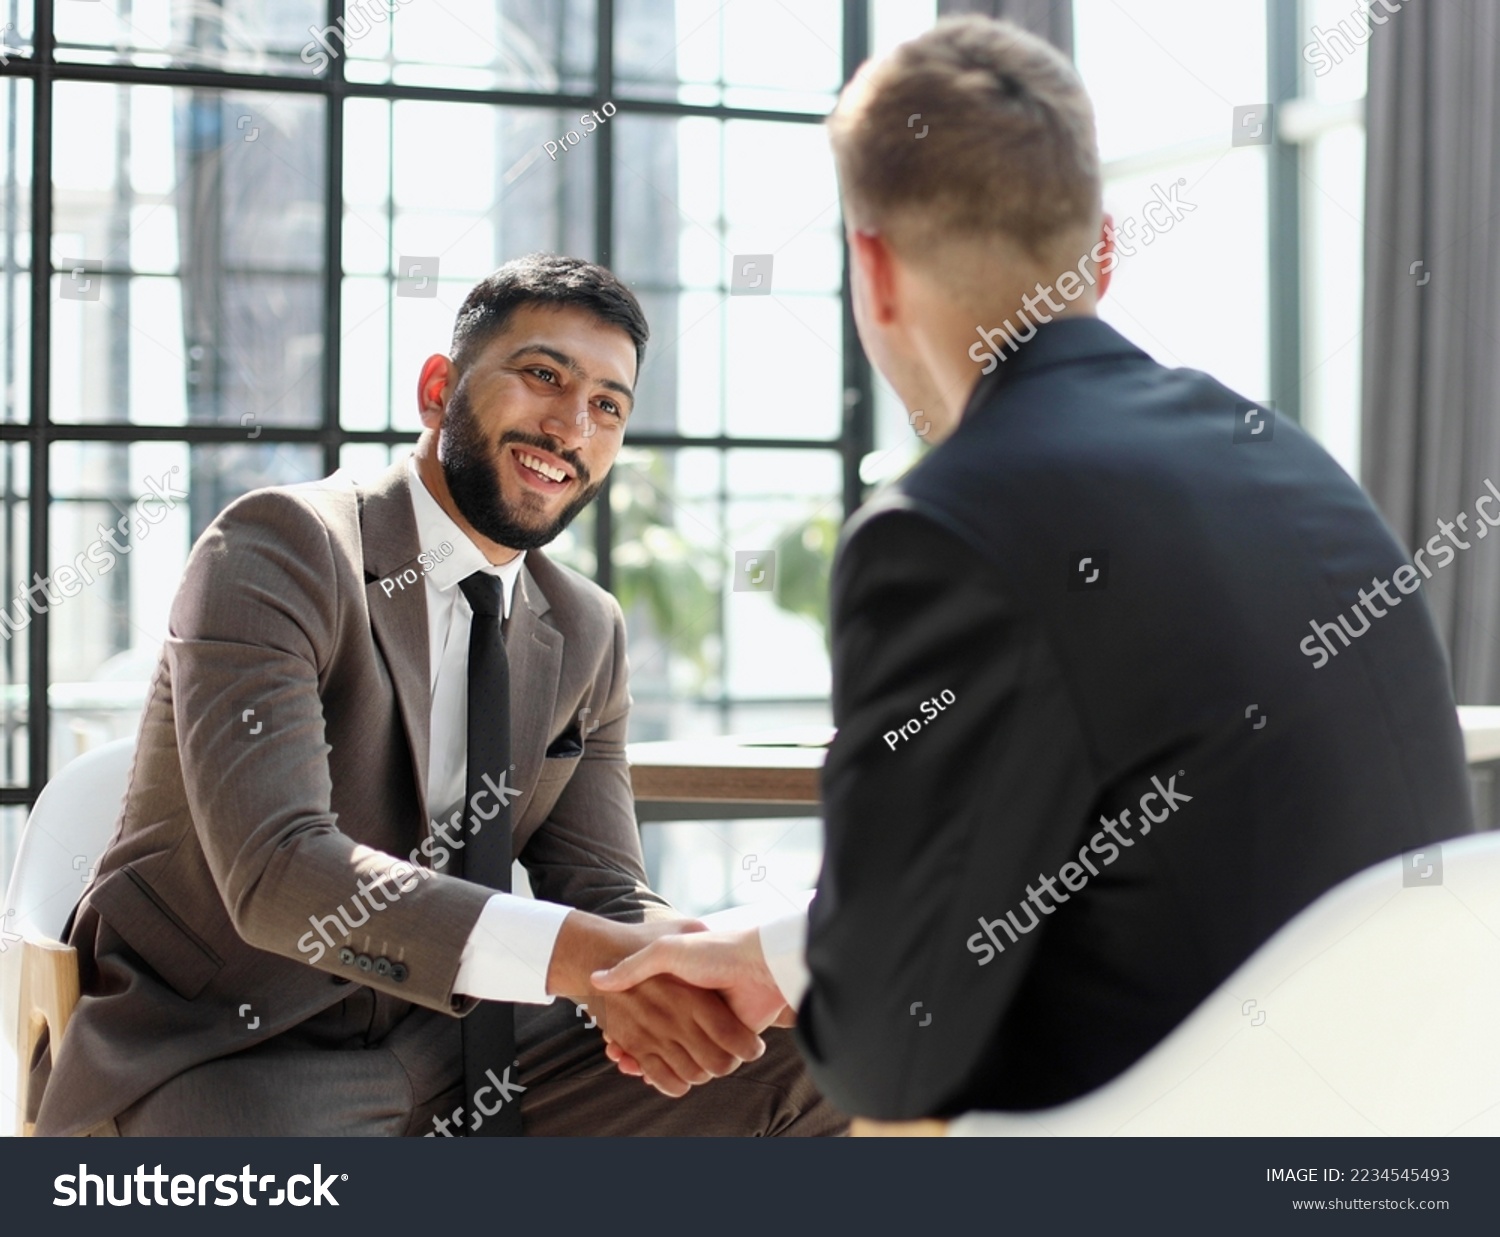 Business shaking hands, finishing up meeting. Successful businessmen handshaking after good deal. #2234545493